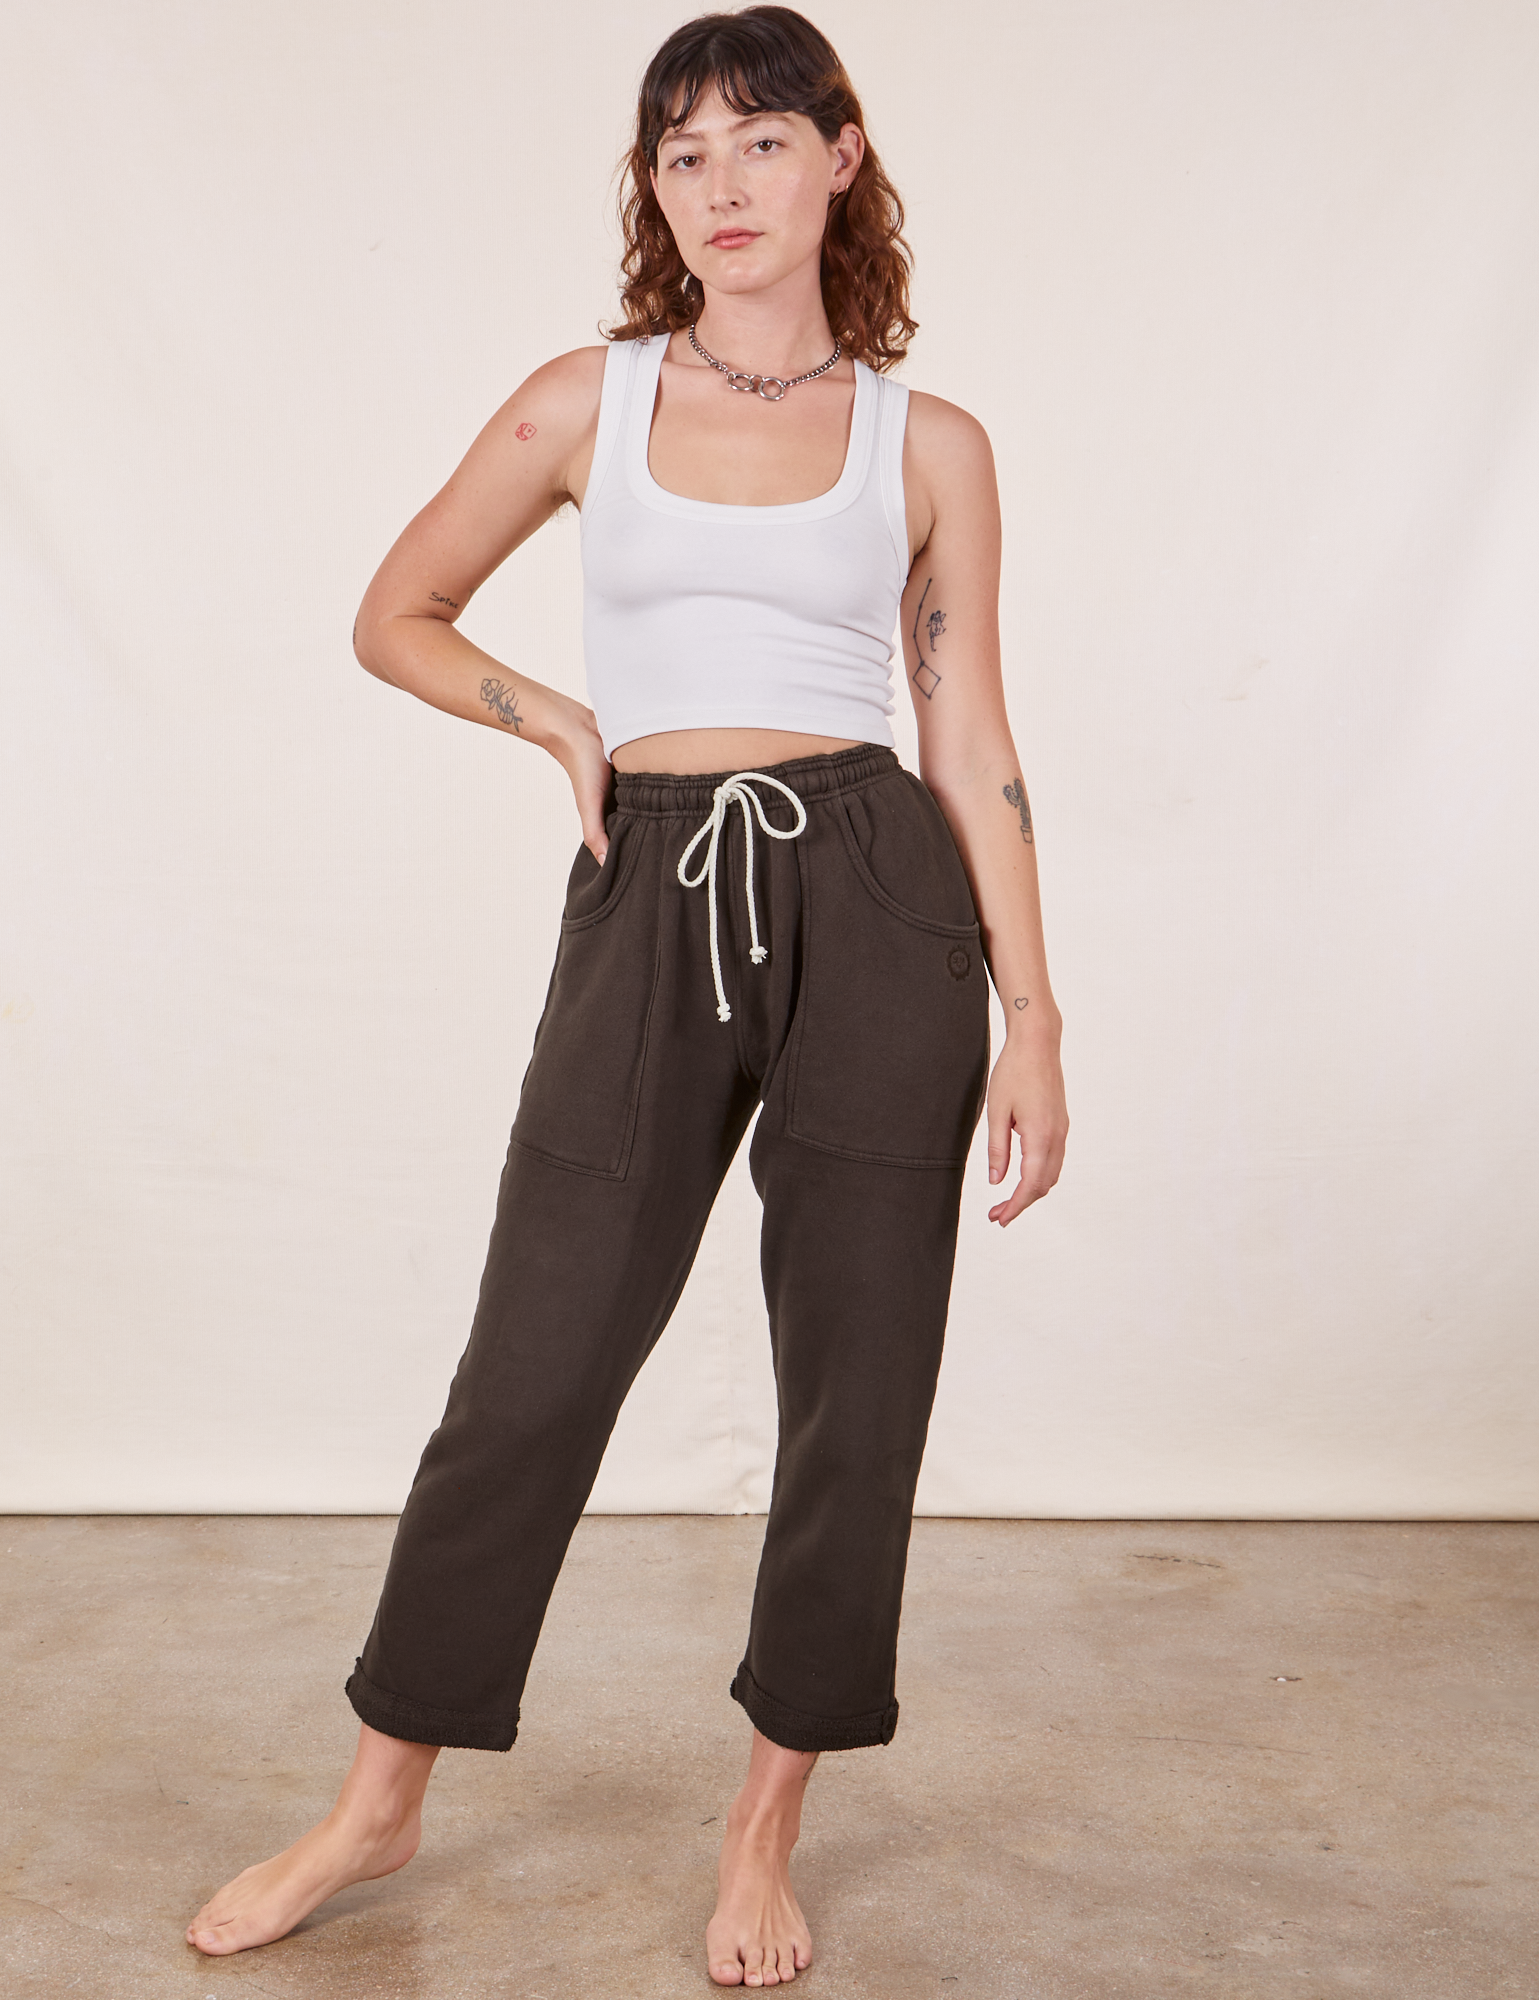 Alex is 5&#39;8&quot; and wearing XXS Cropped Rolled Cuff Sweatpants in Espresso Brown paired with vintage off-white Cropped Tank Top